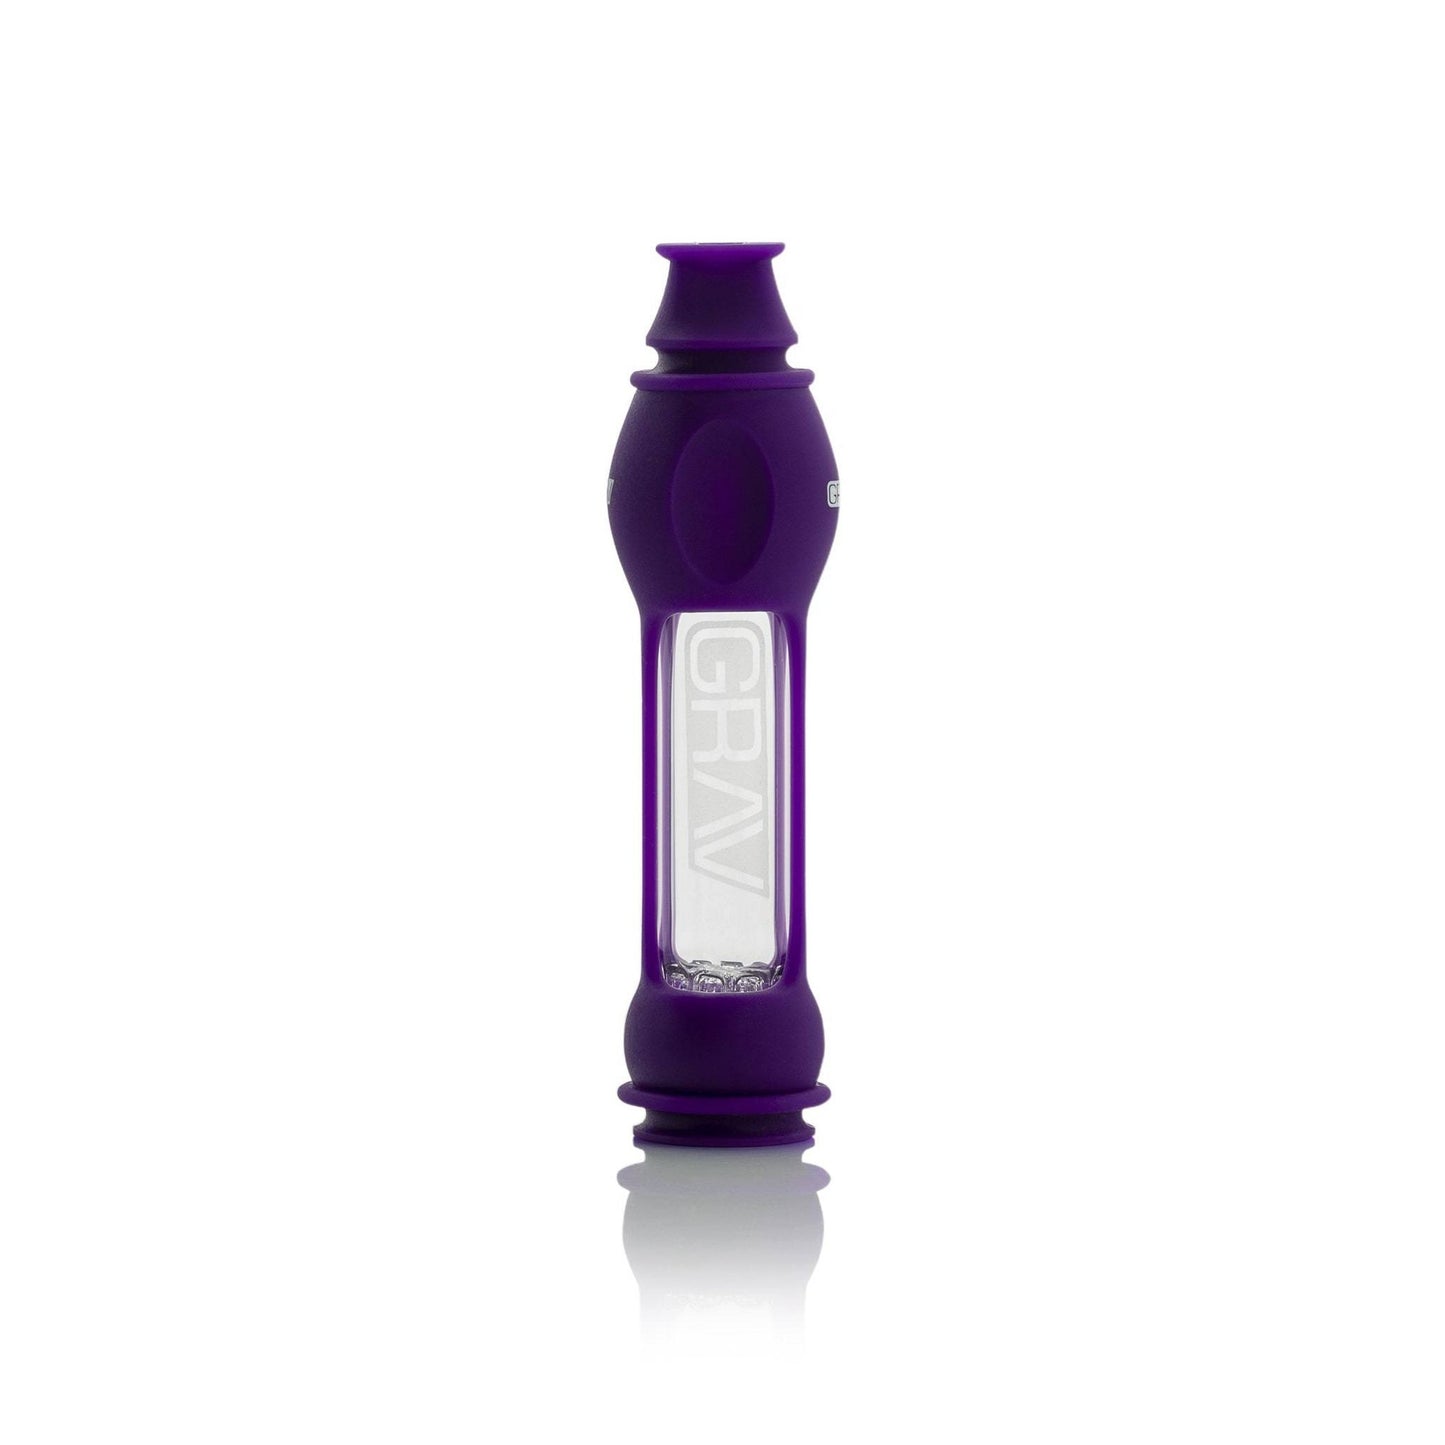 16mm GRAV Octo-taster with Silicone Skin - 4in Purple